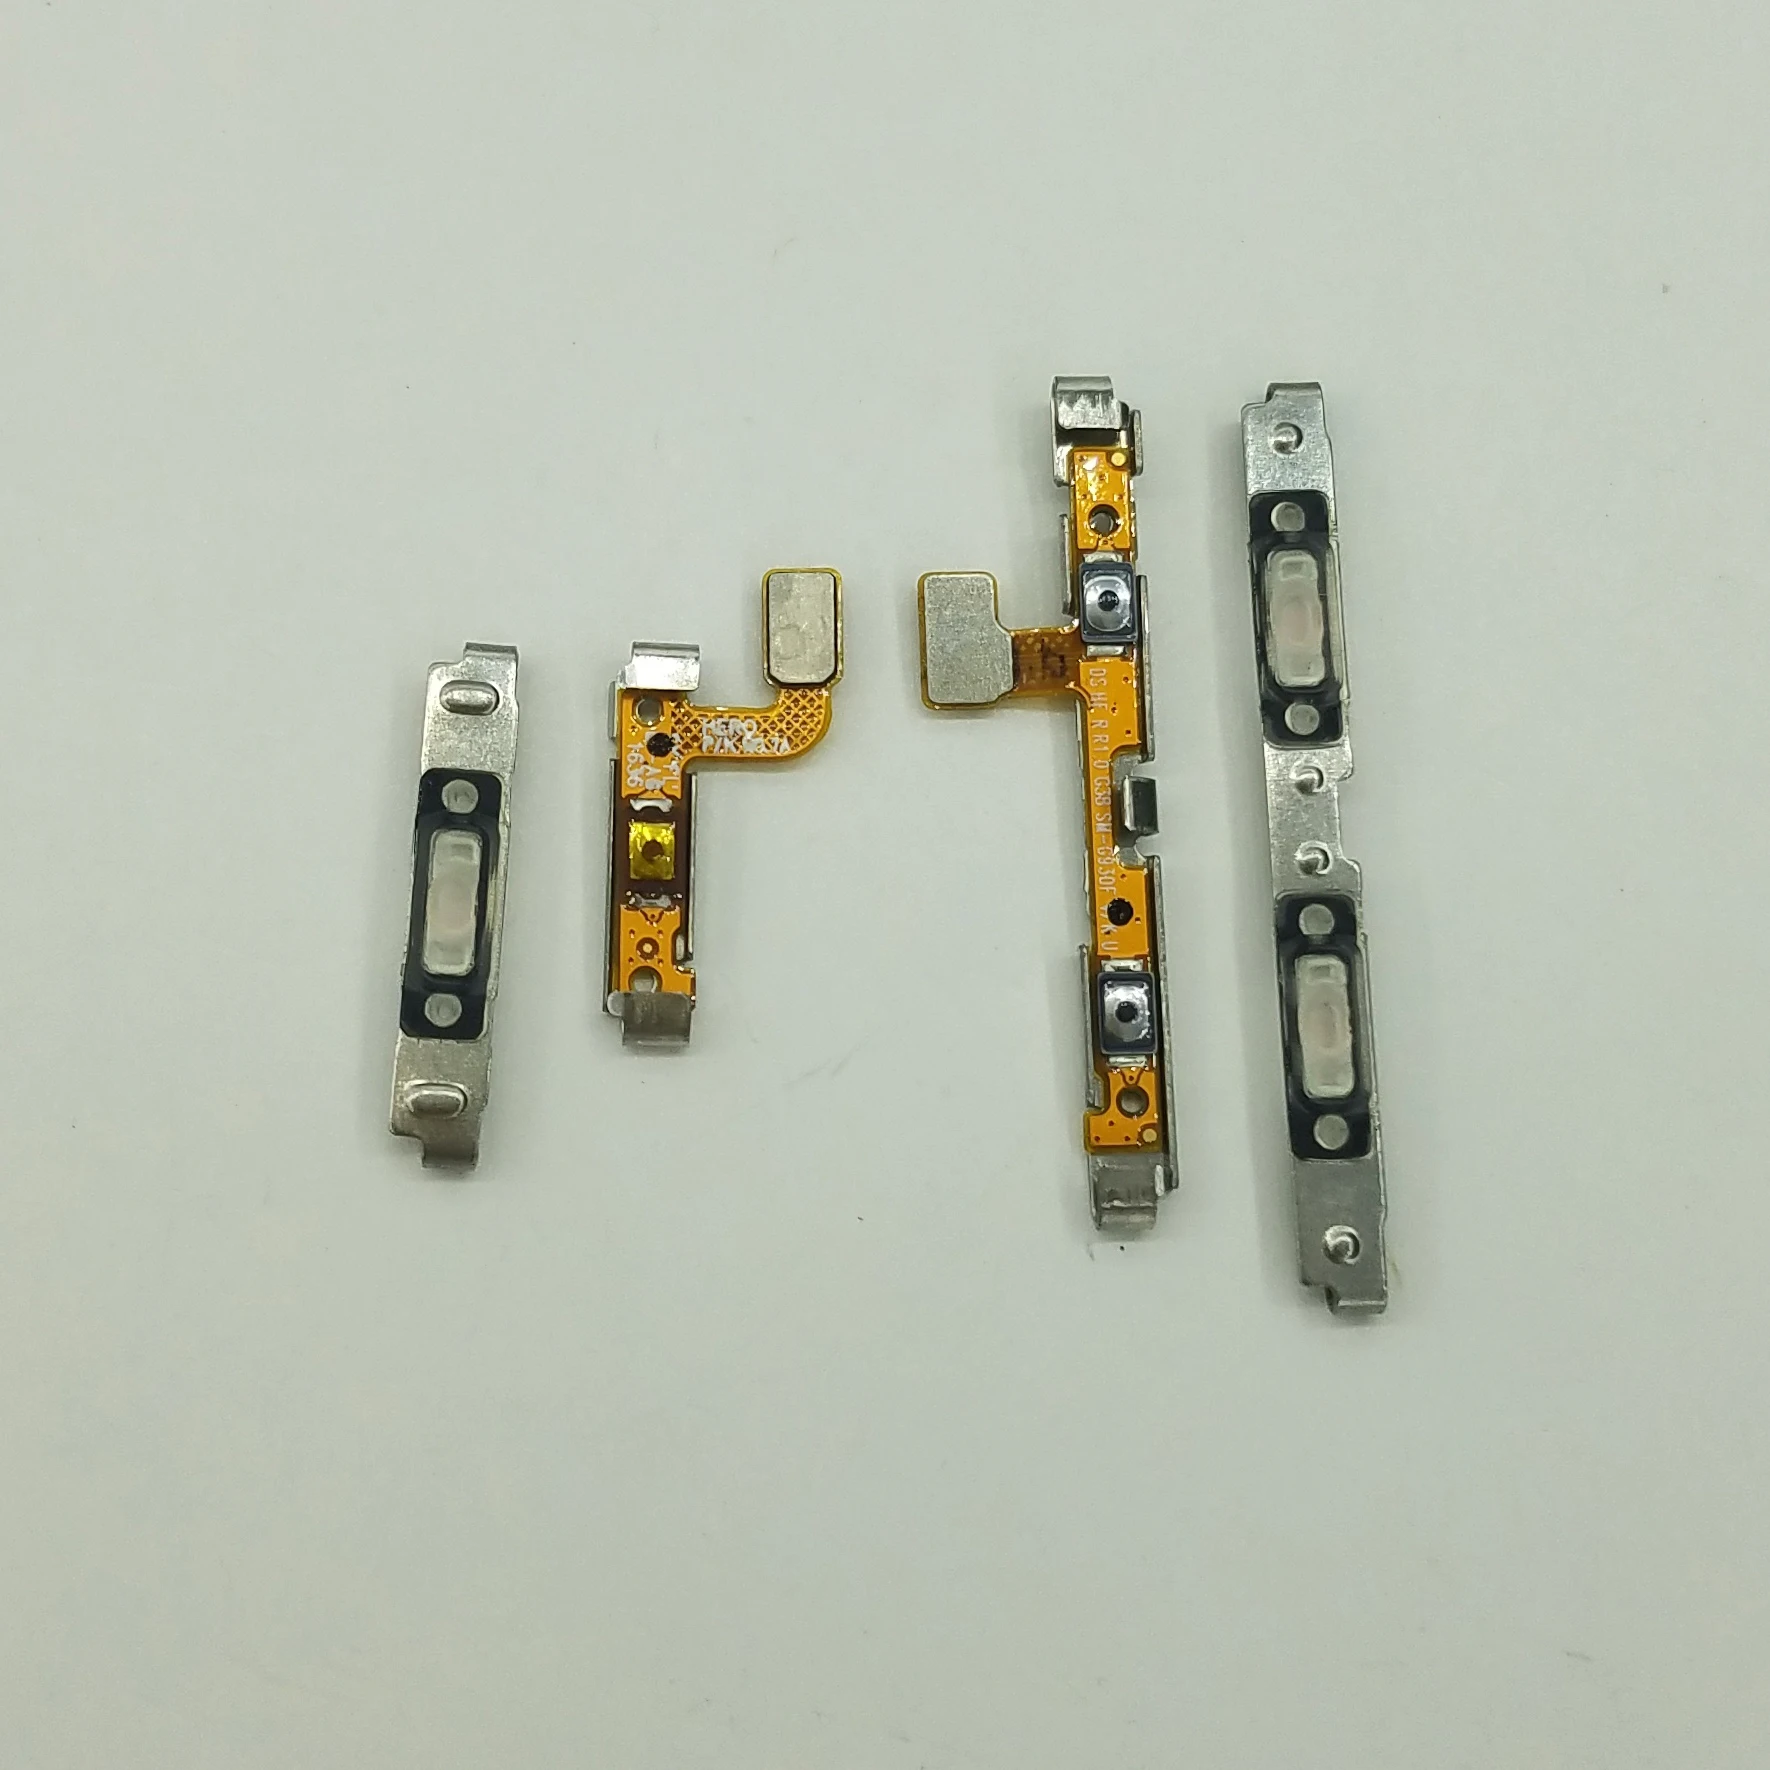 

For Samsung Galaxy S7 G930 G930F G930FD G930A G930P G930V Original Phone Housing Power Volume Button On Off Key Flex Cable